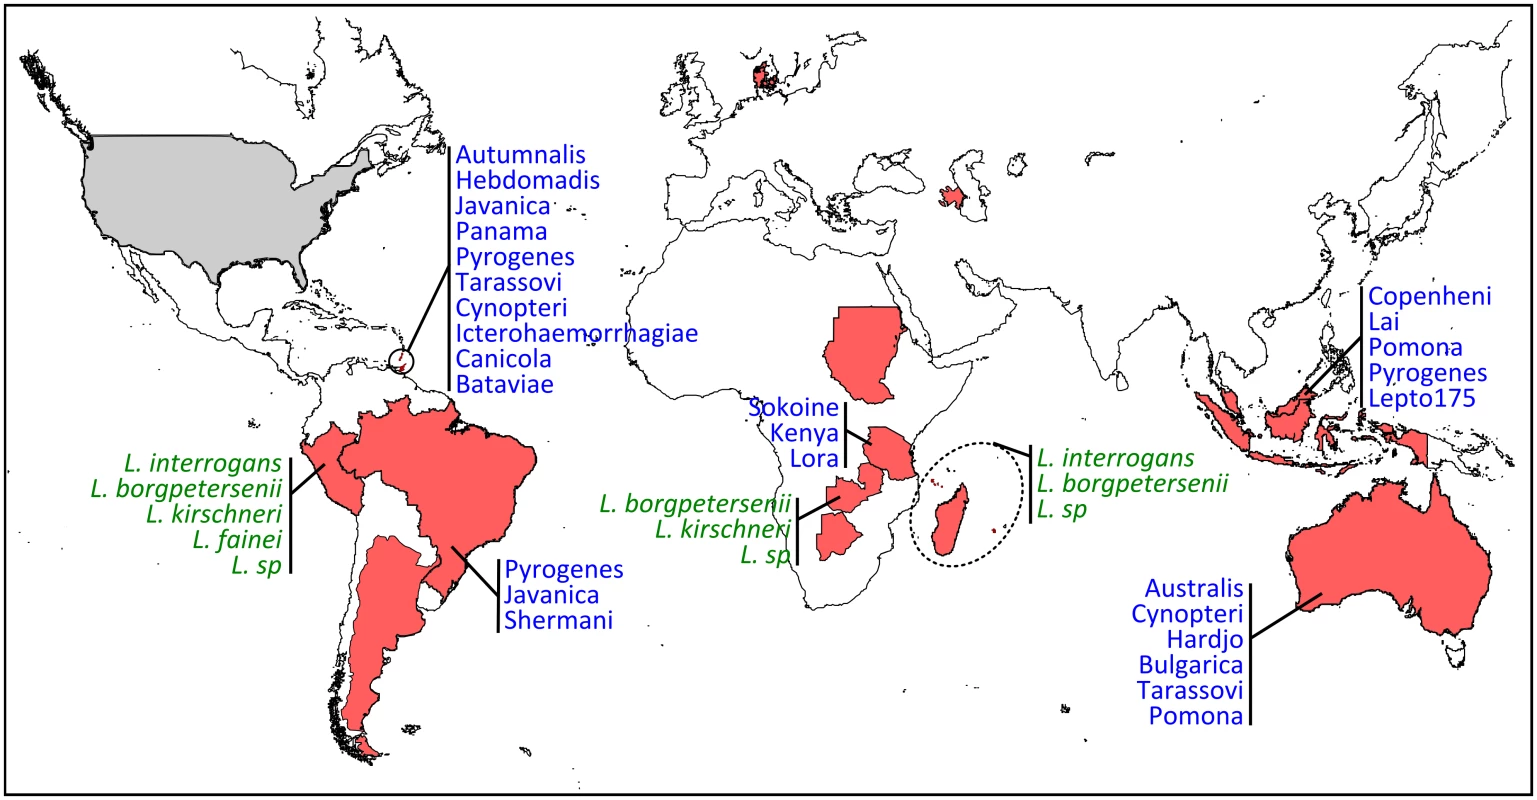 Geographic distribution and diversity of <i>Leptospira</i> in bats.